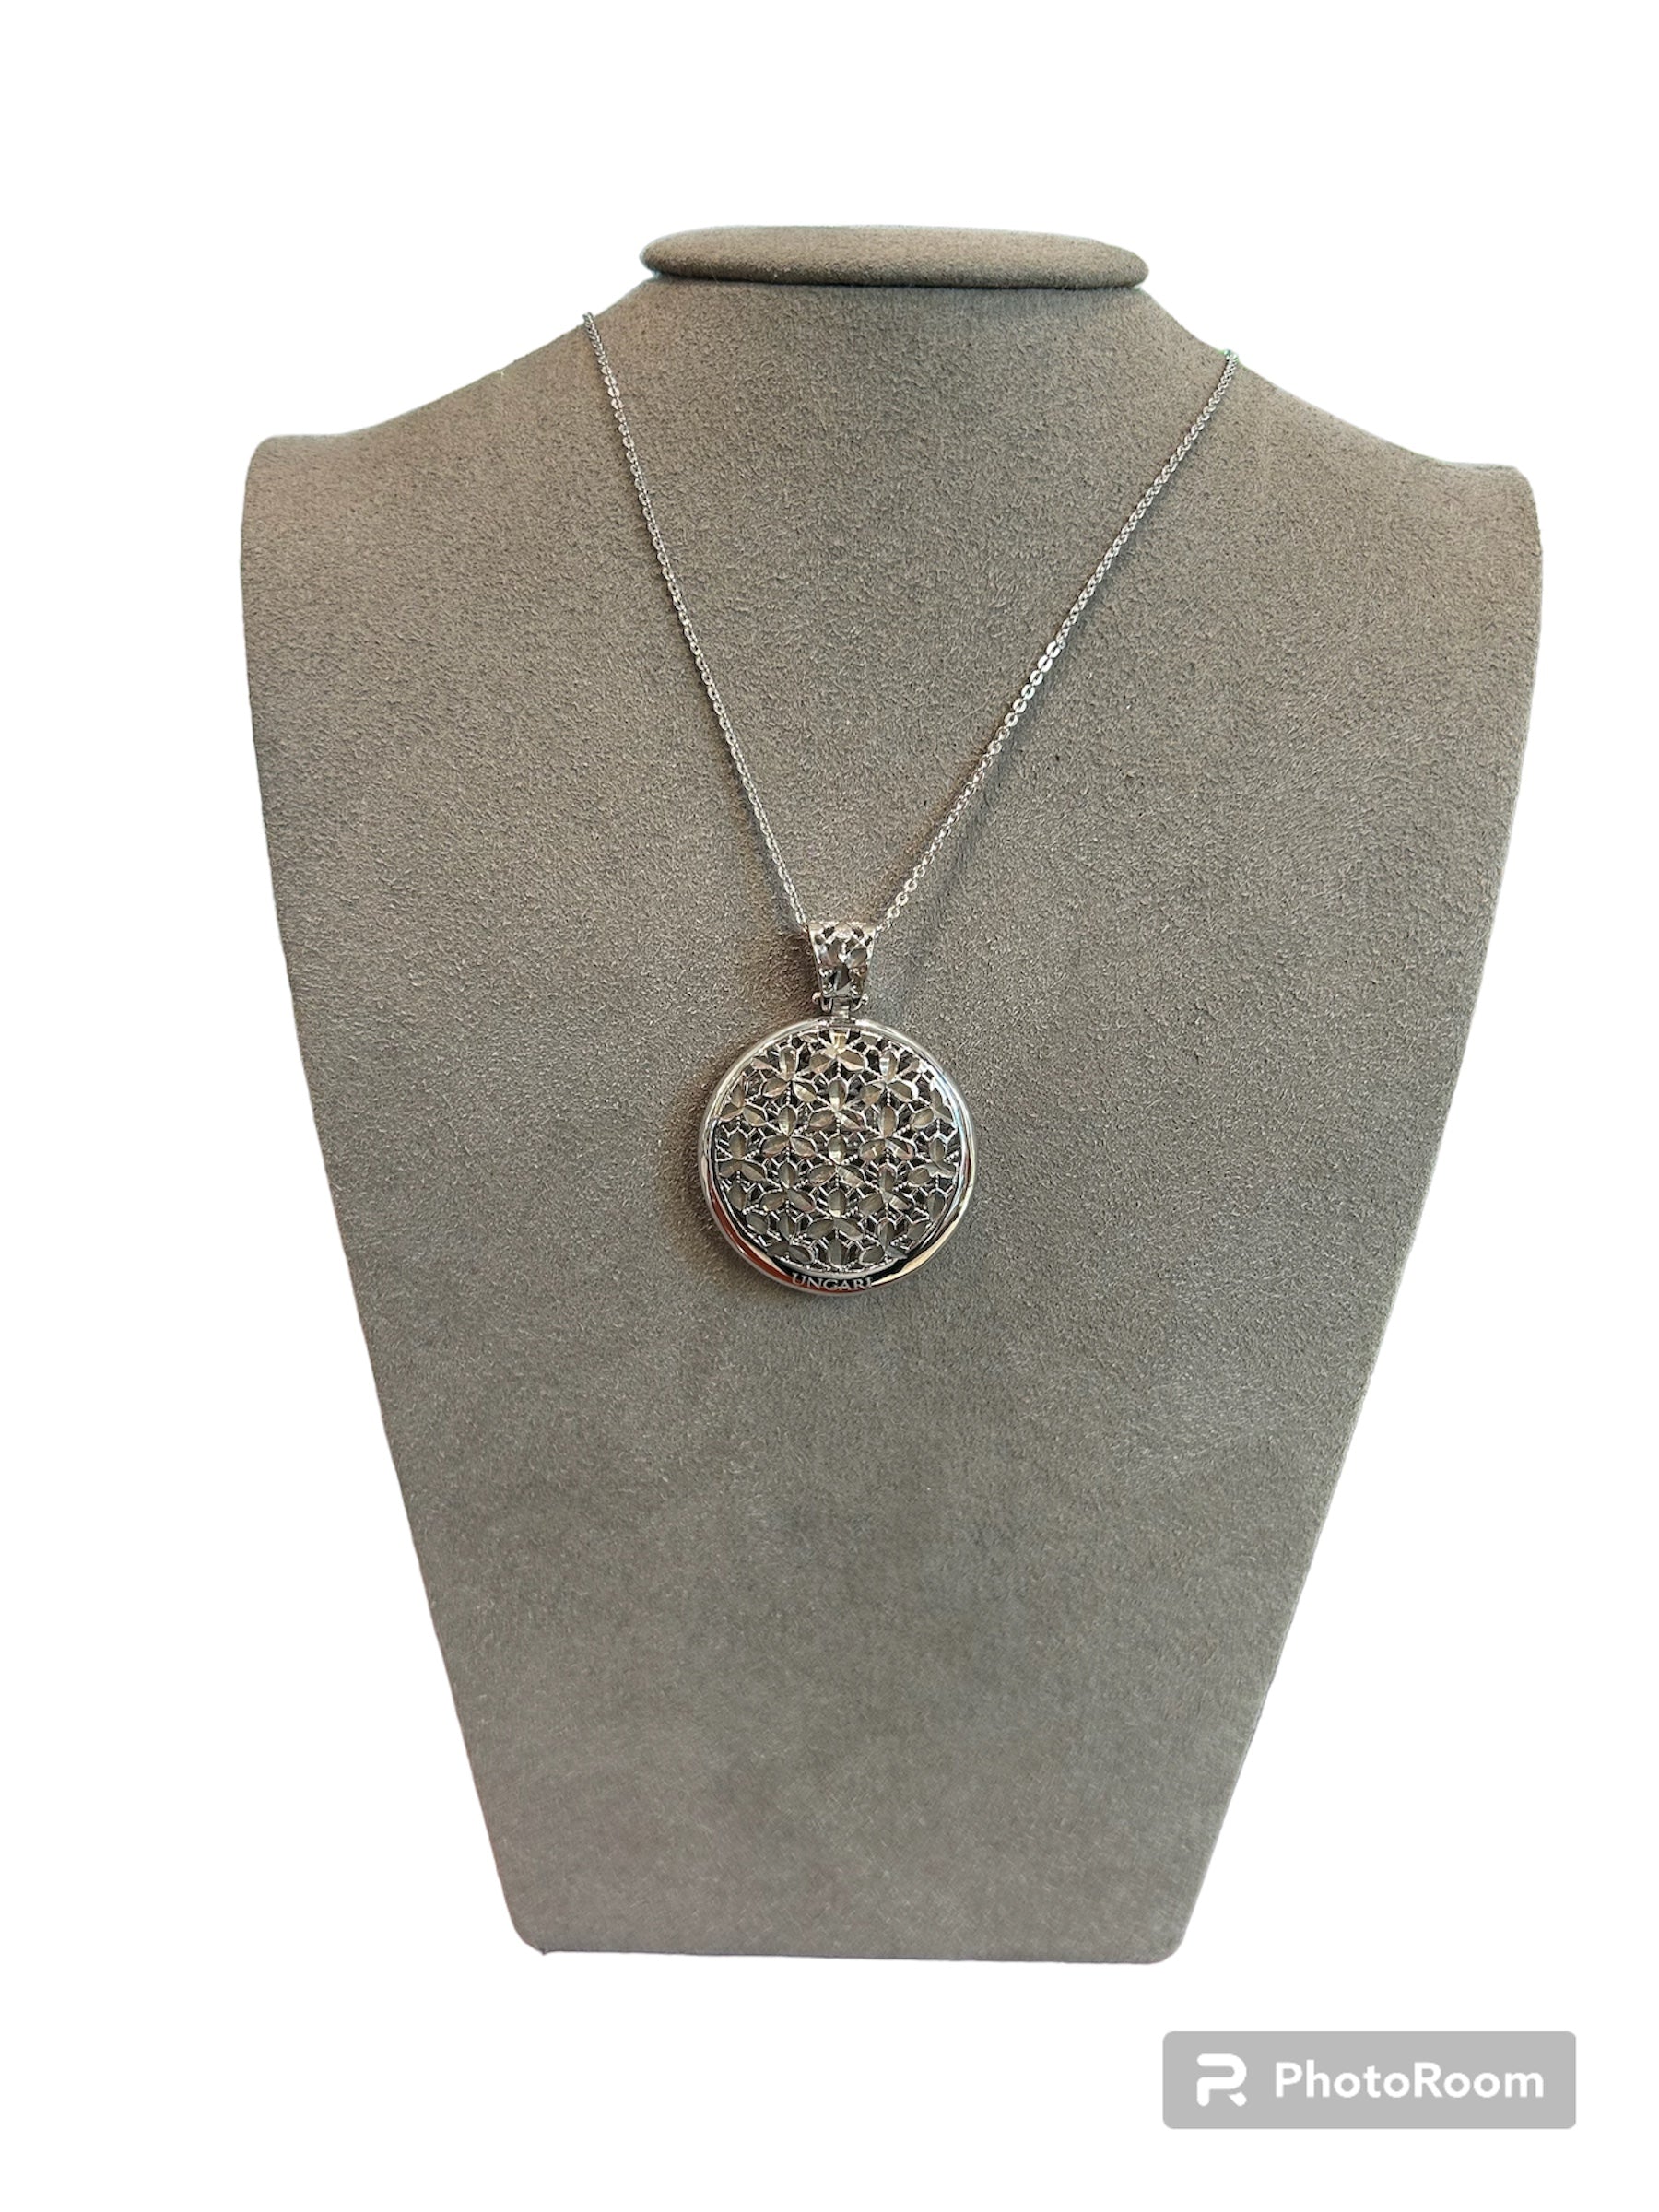 Silver necklace with medallion - CL 010B